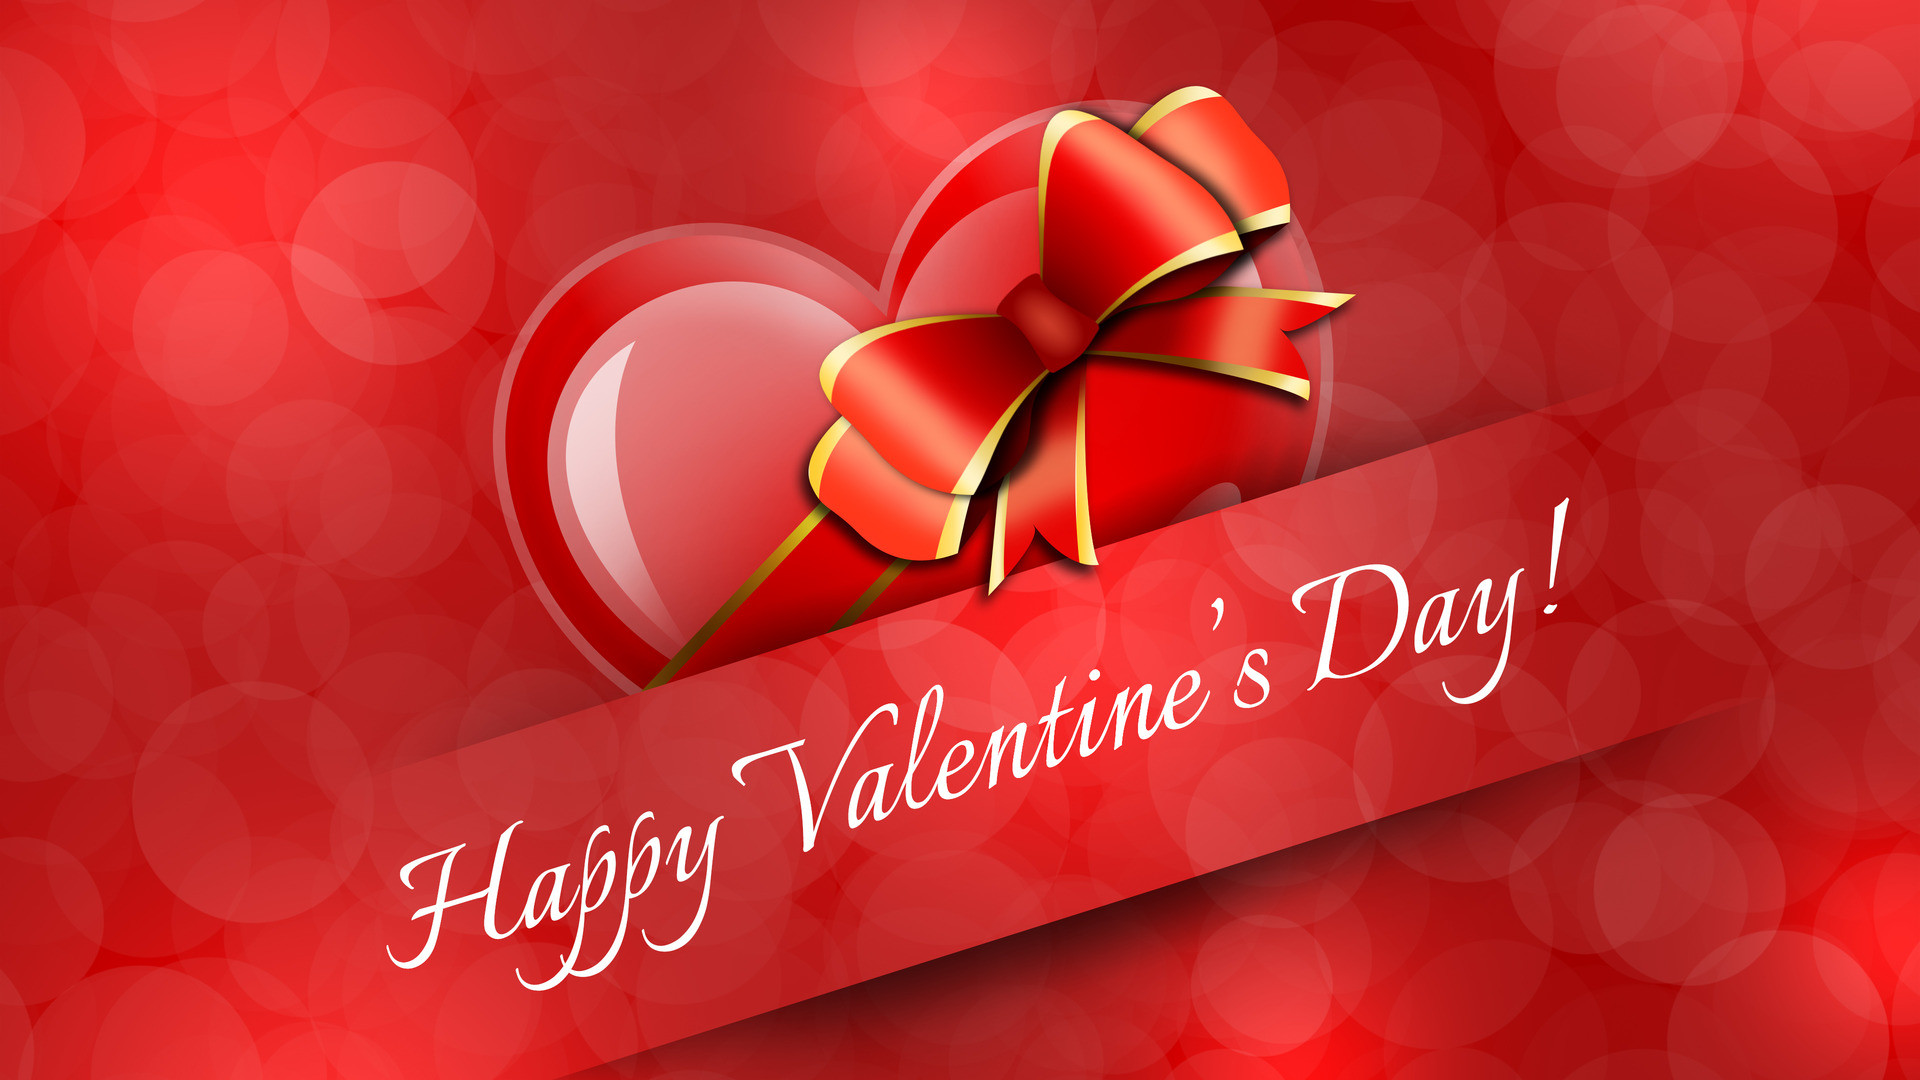 1920x1080 ... Cute Valentines Day Wallpapers - Wallpaper Cave ...